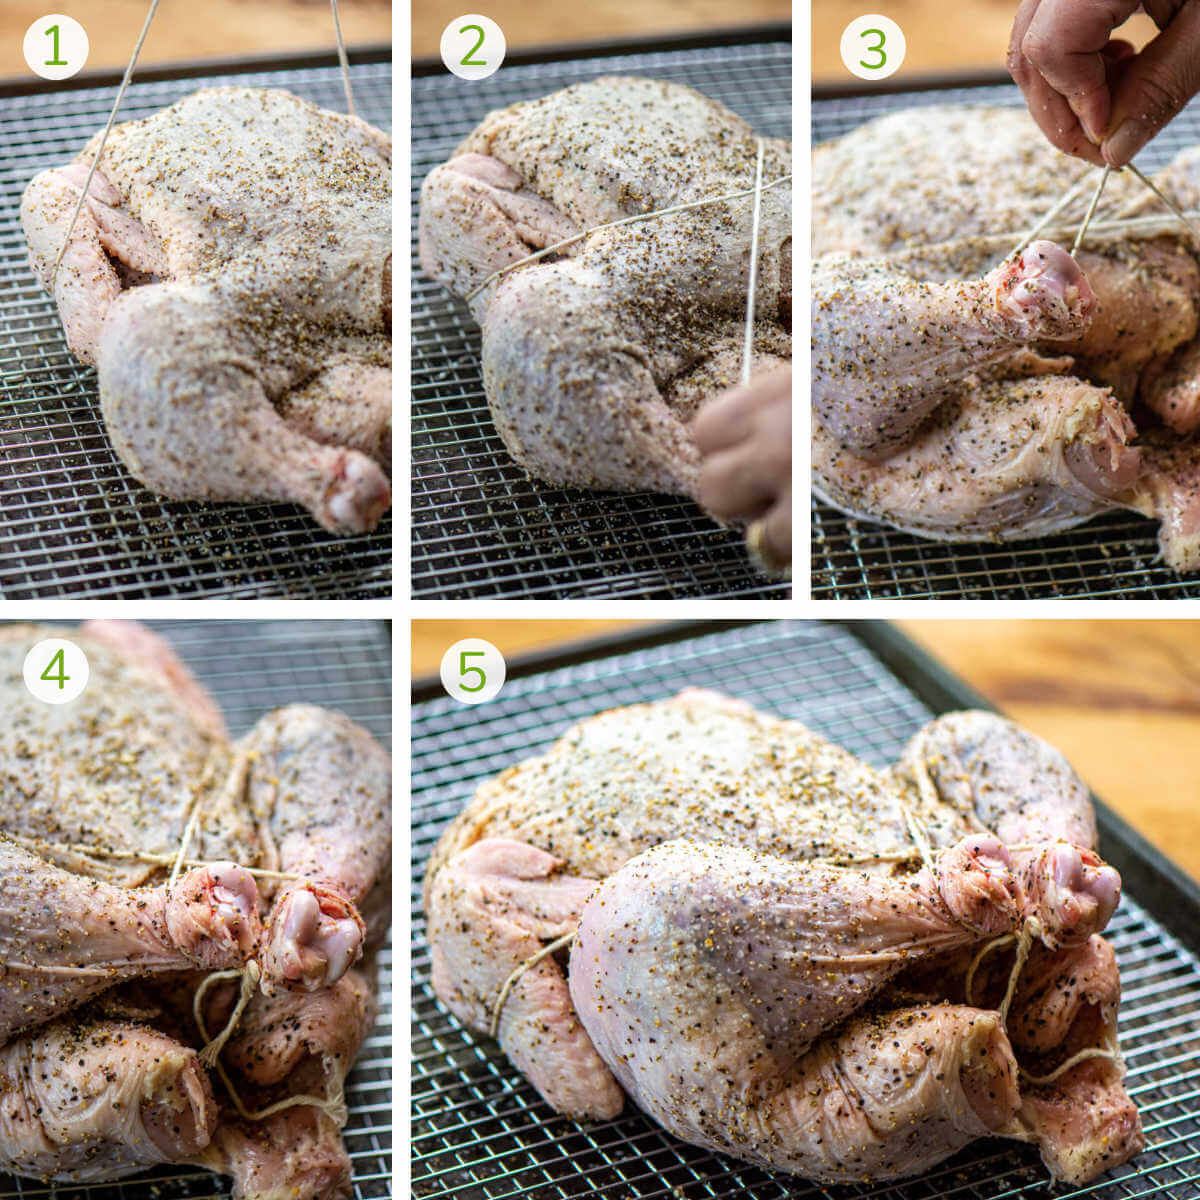 five process photos showing how to truss a whole chicken for brining and smoking.